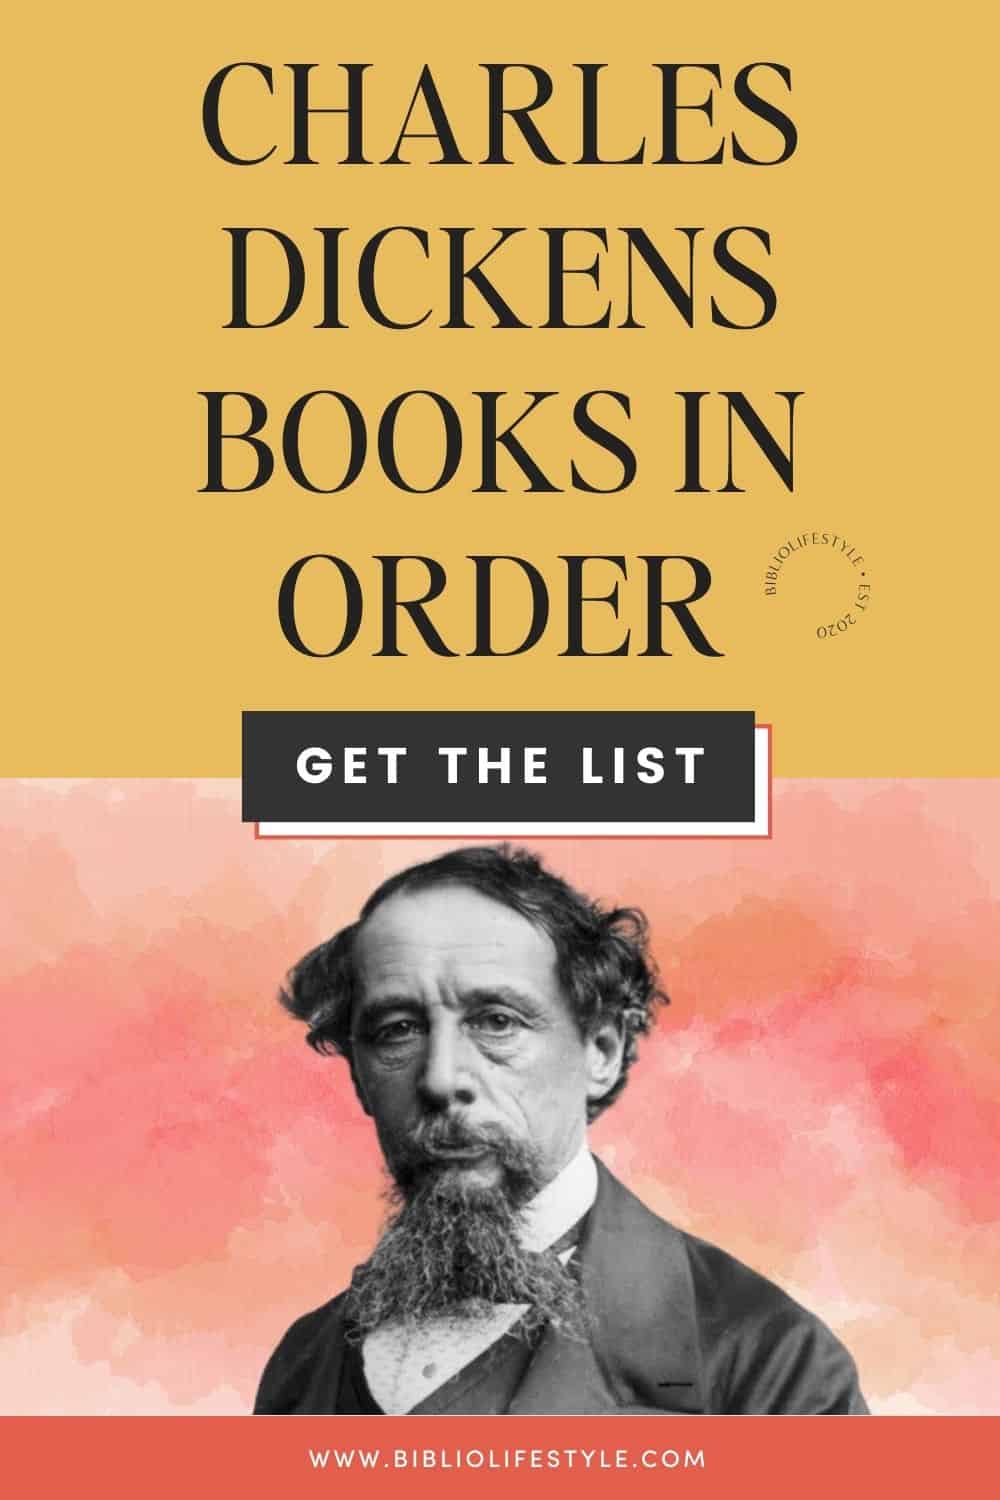 Charles Dickens Books in Order